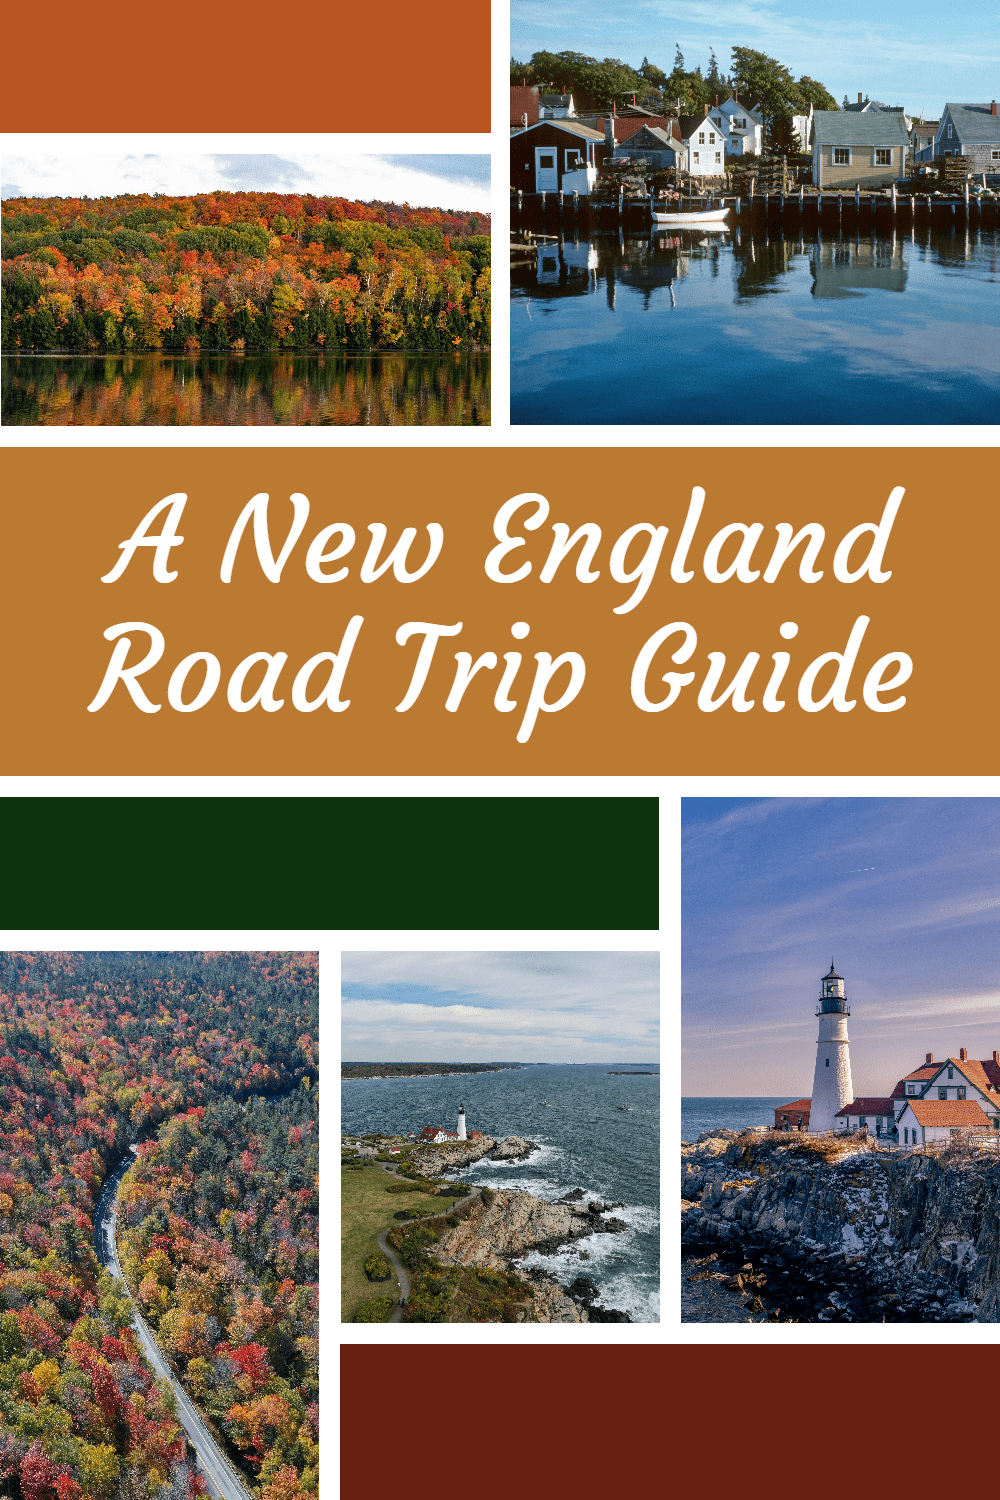 This northeast area of the United States is full of history, perfect colonial seaside towns and rural waterfalls set in forests. It is the perfect place to take a US Road Trip! #travel #ustravel #usa #roadtrip #TBIN